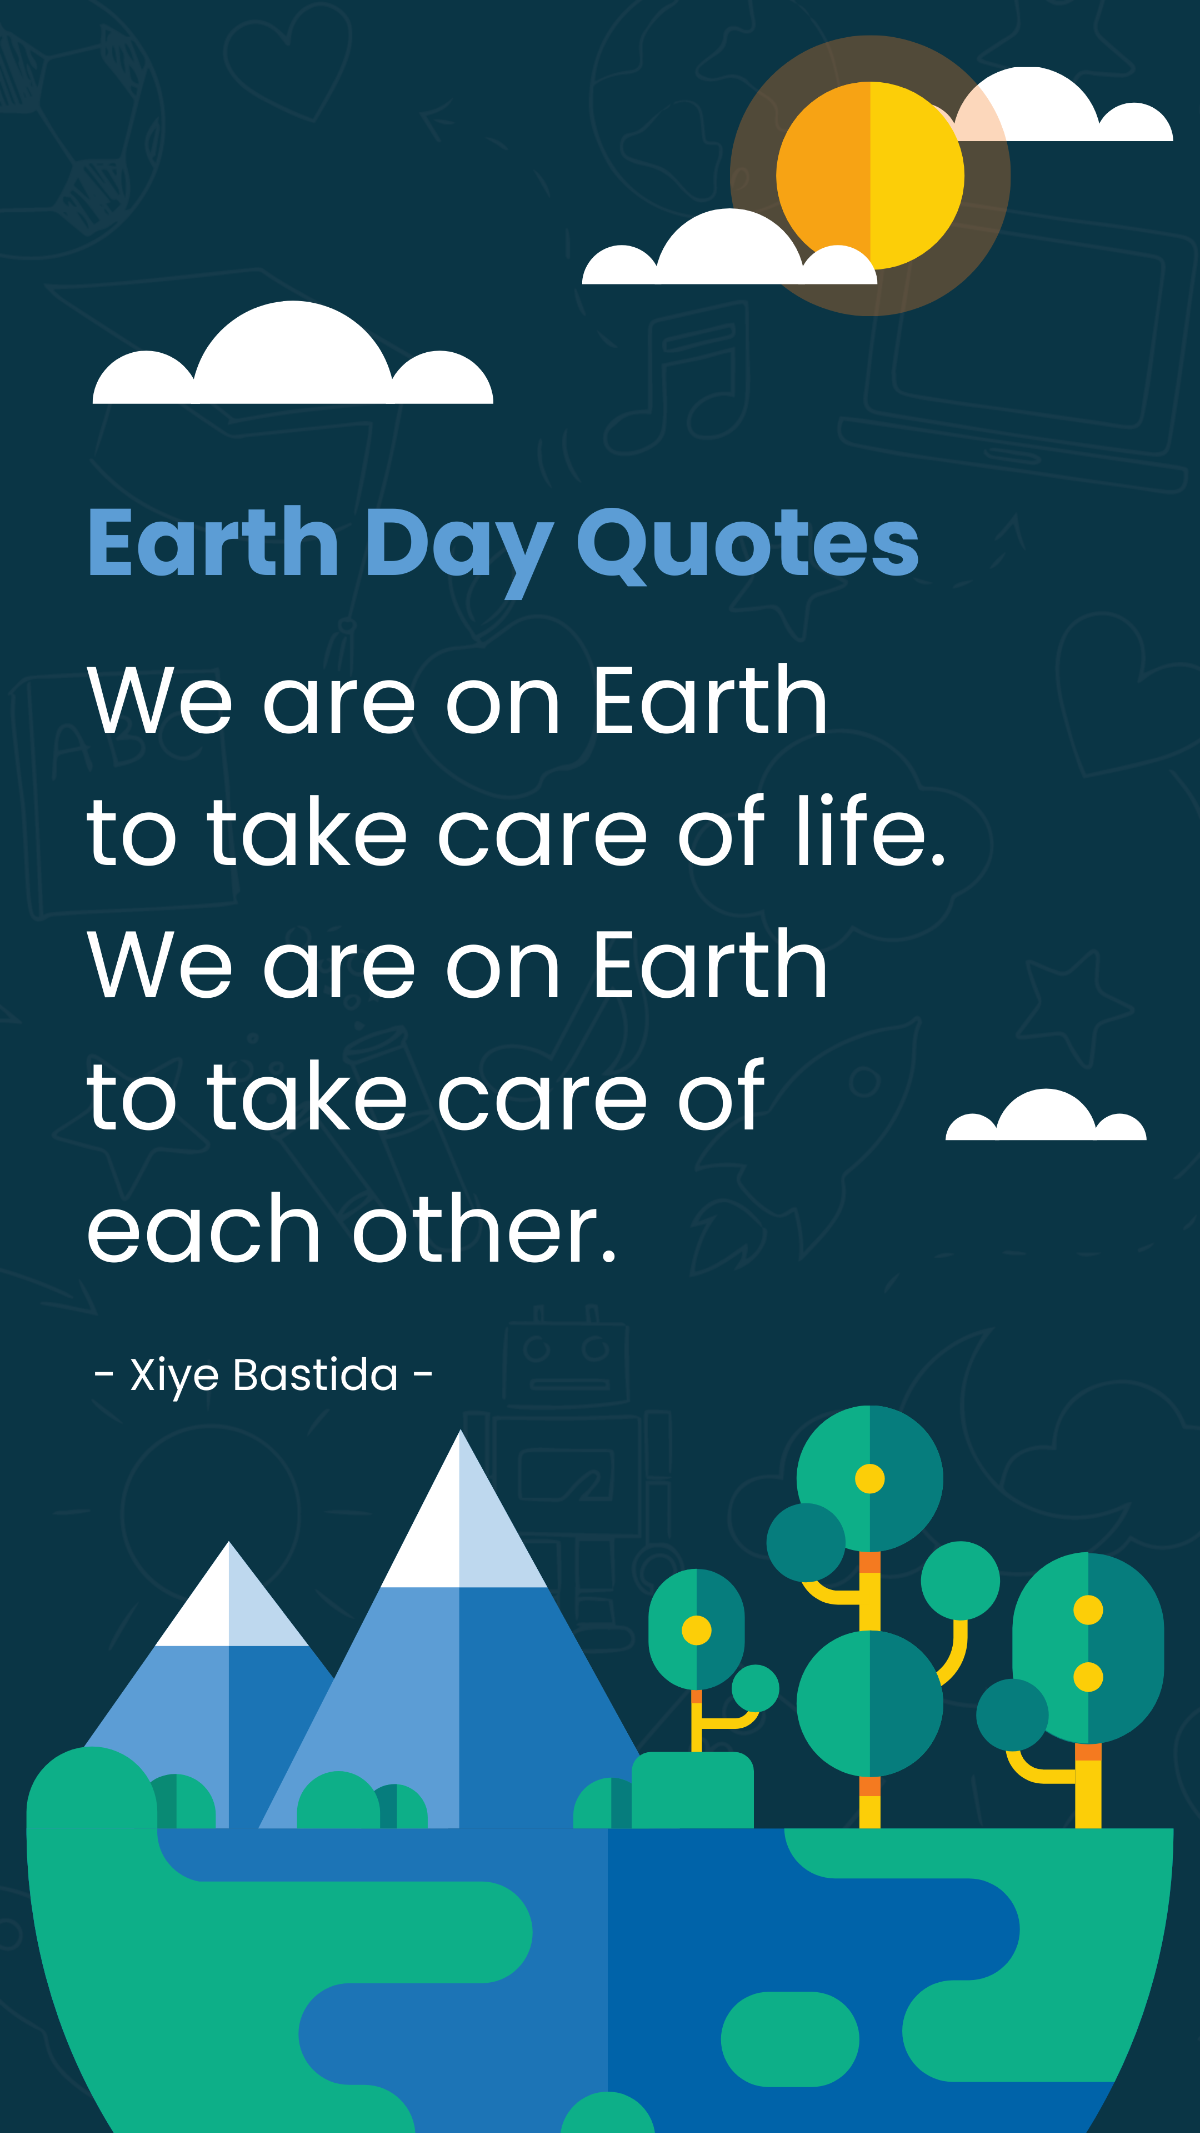 Earth Day Quotes for Students Template